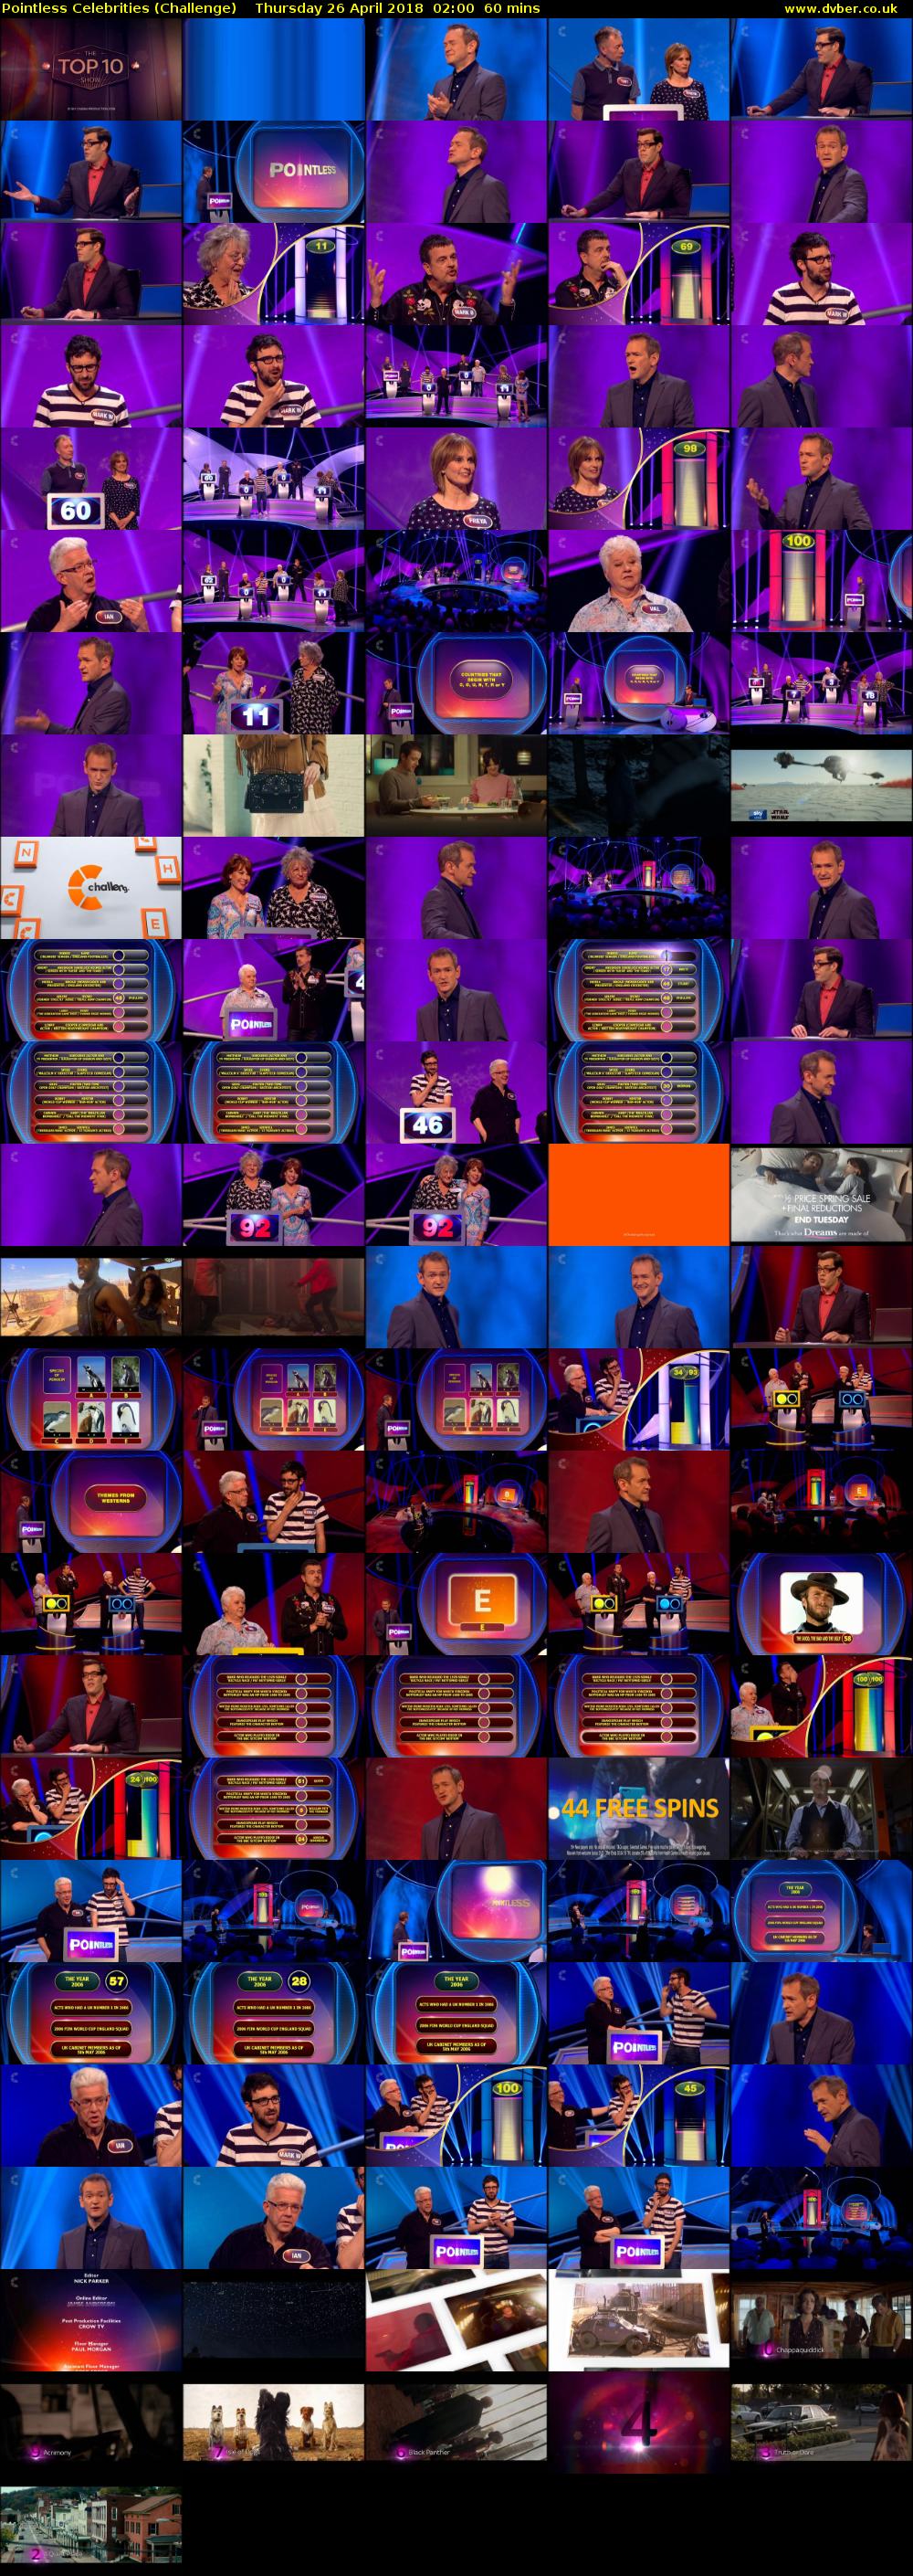 Pointless Celebrities (Challenge) Thursday 26 April 2018 02:00 - 03:00